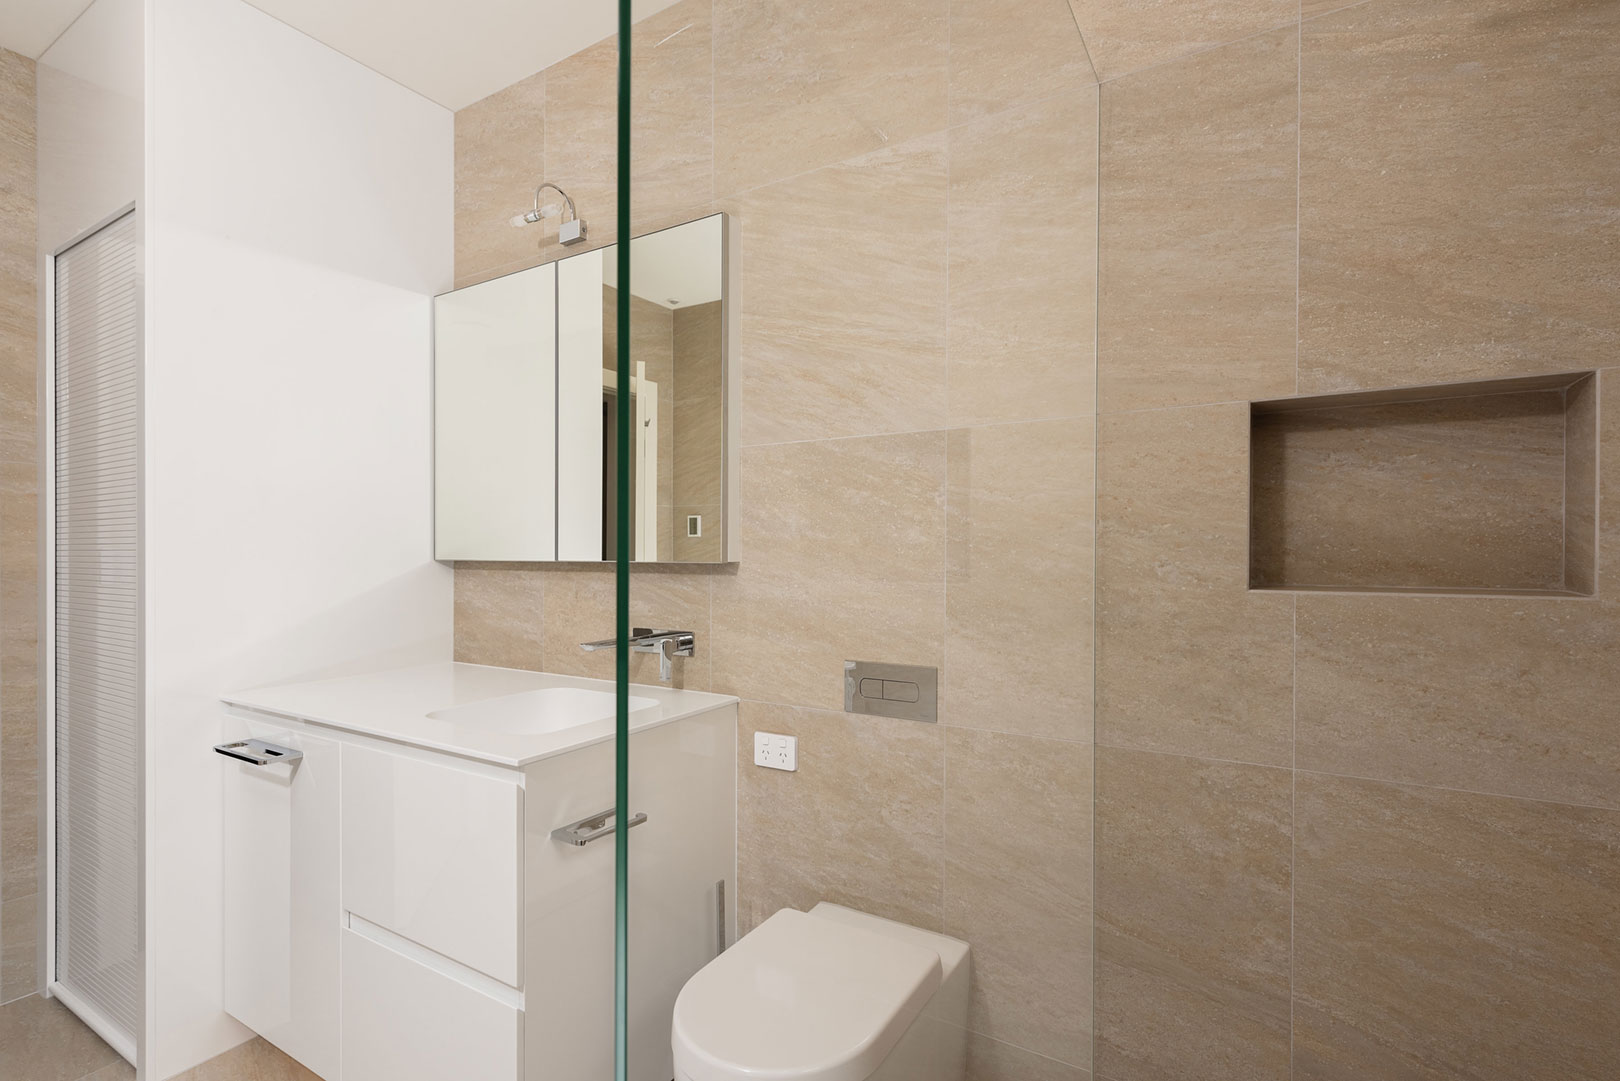 Professional Bathroom Renovations: Why They’re Needed